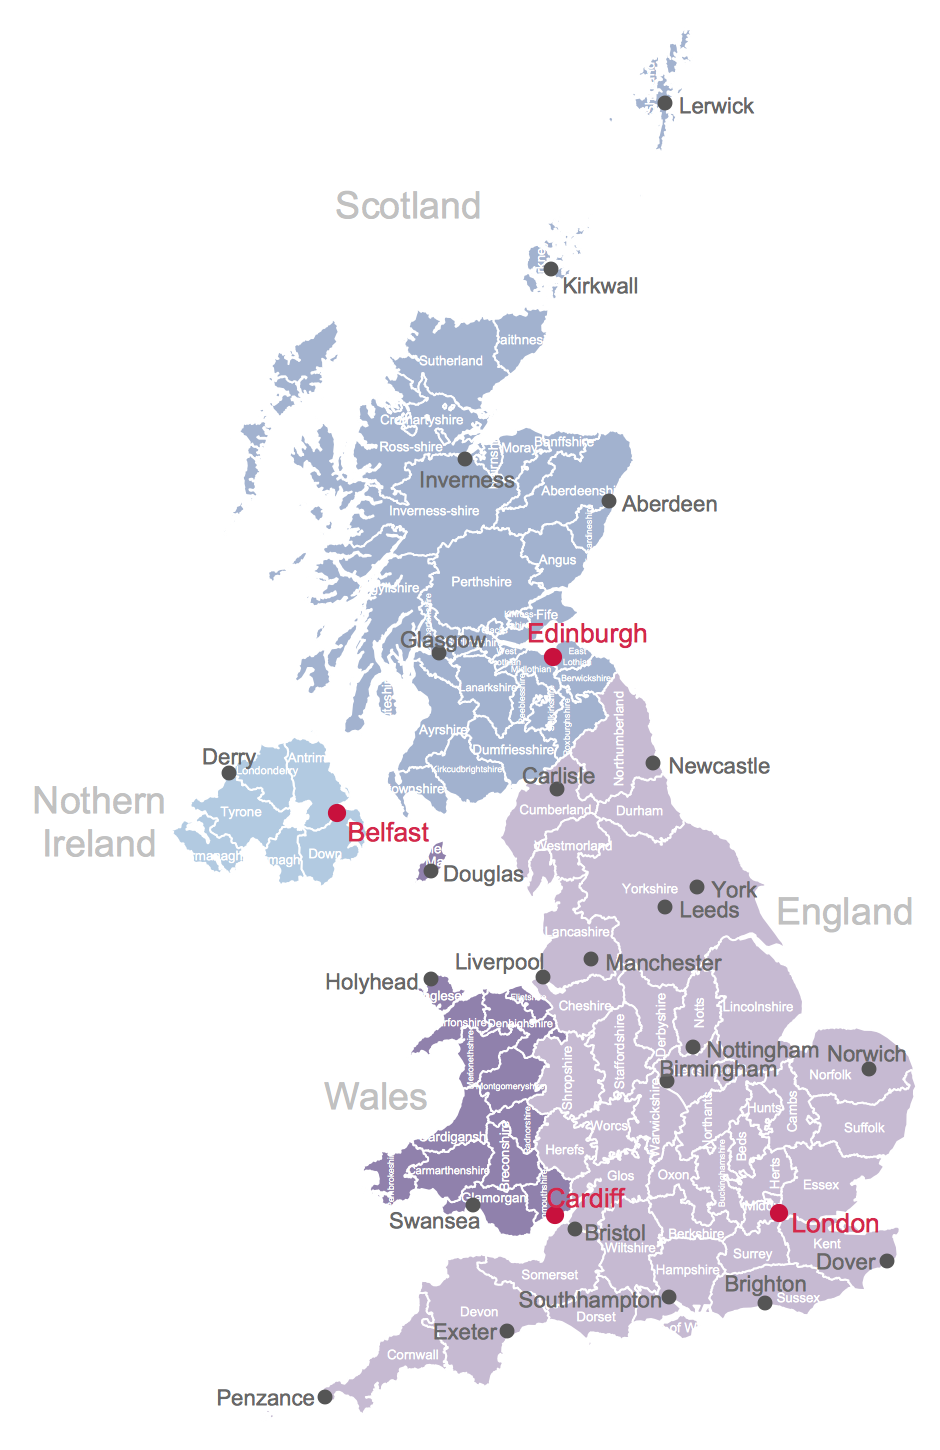  Map of the British Isles-Counties